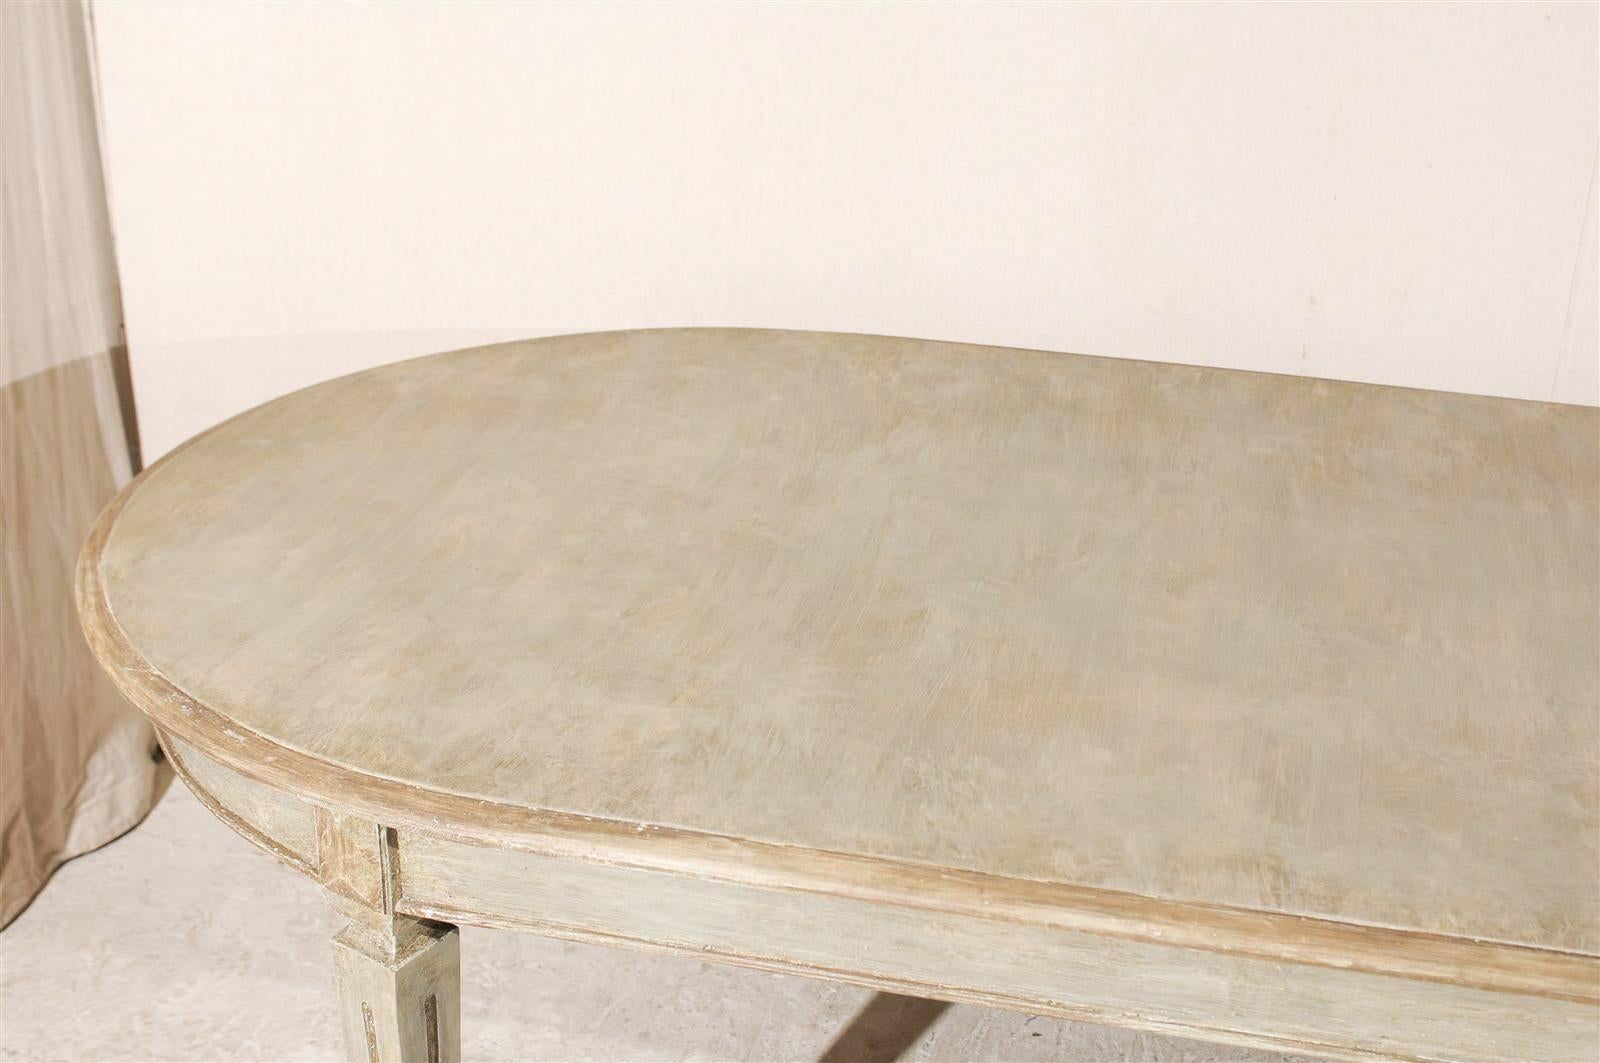 Wood Swedish Oval Shaped Gustavian Style Dining Table